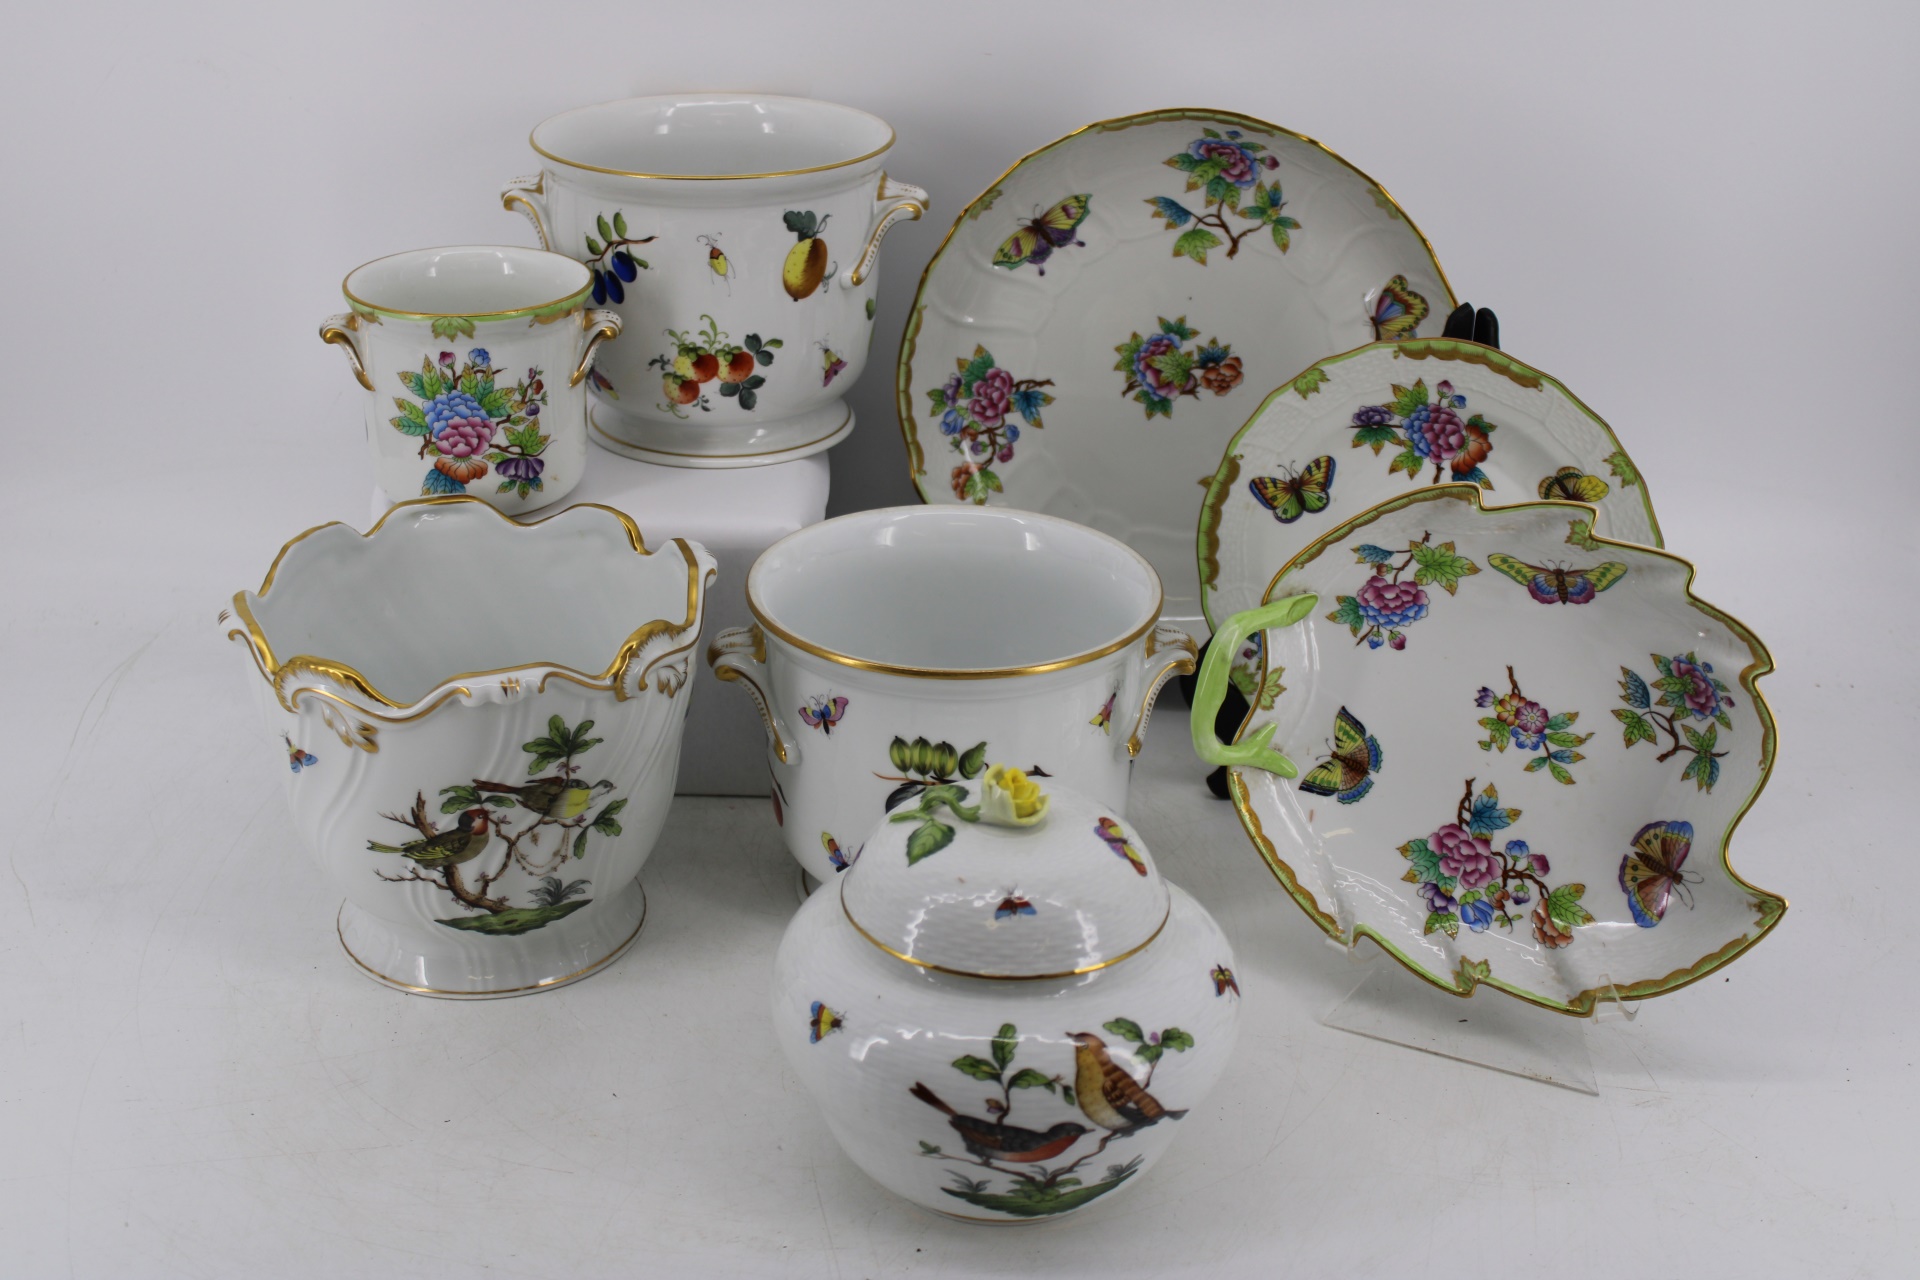 GROUPING OF HEREND PORCELAIN included 3bca84